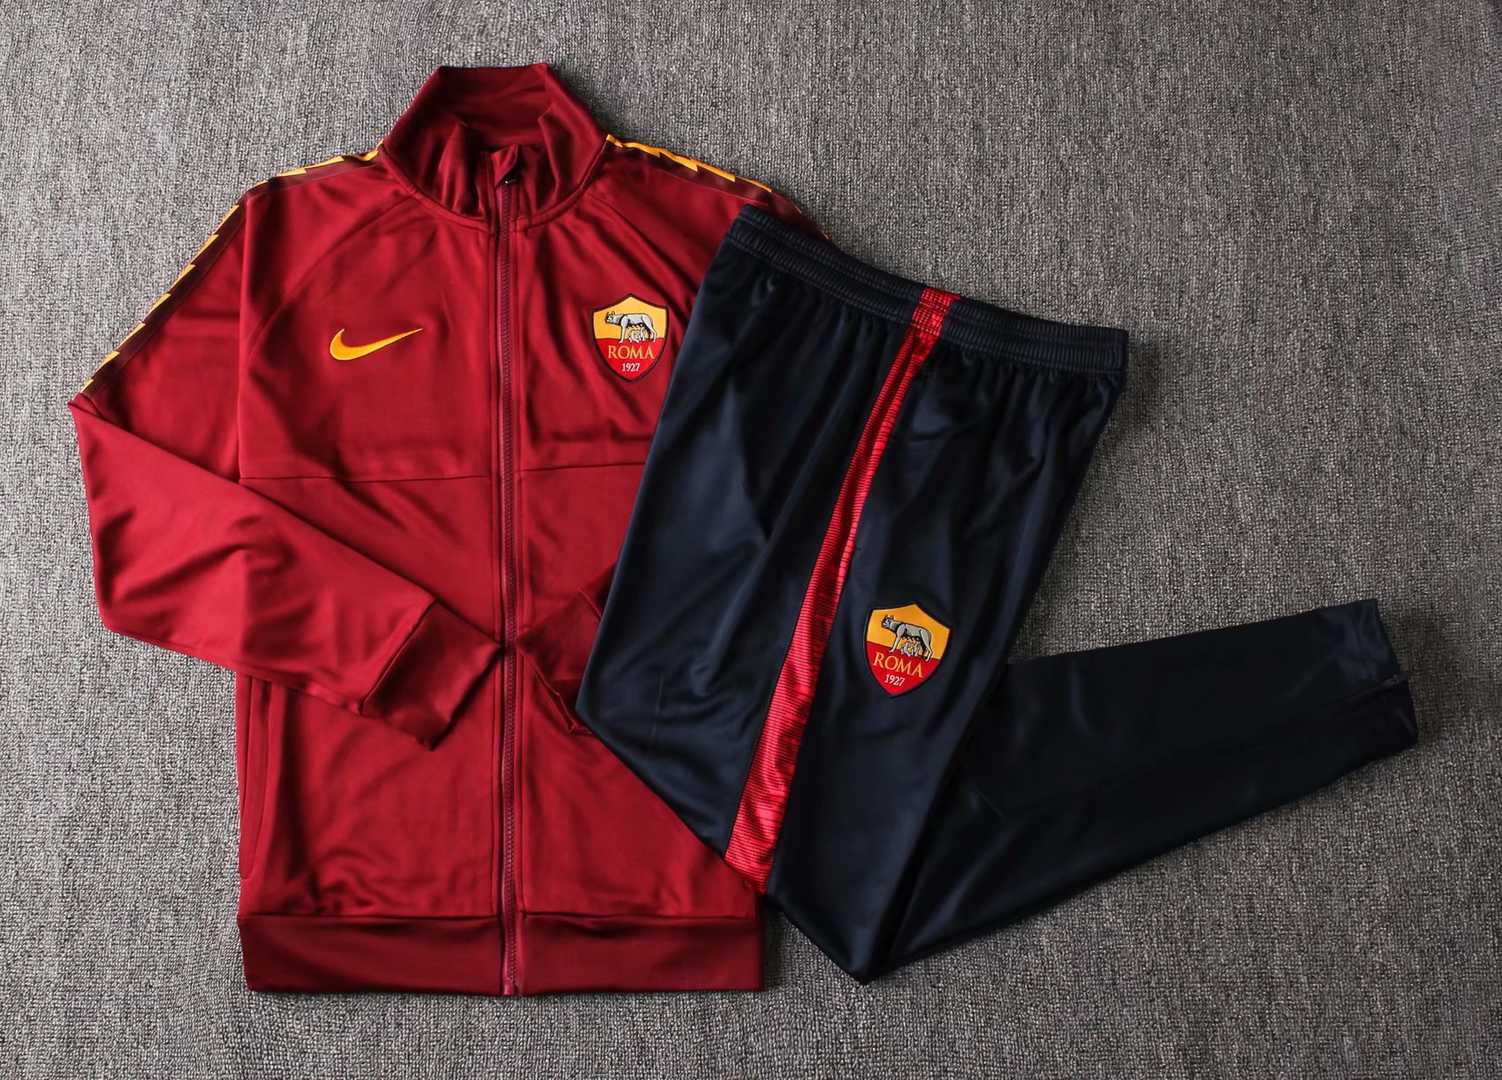 2019/20 AS Roma High Neck Burgundy Mens Soccer Training Suit(Jacket + Pants)